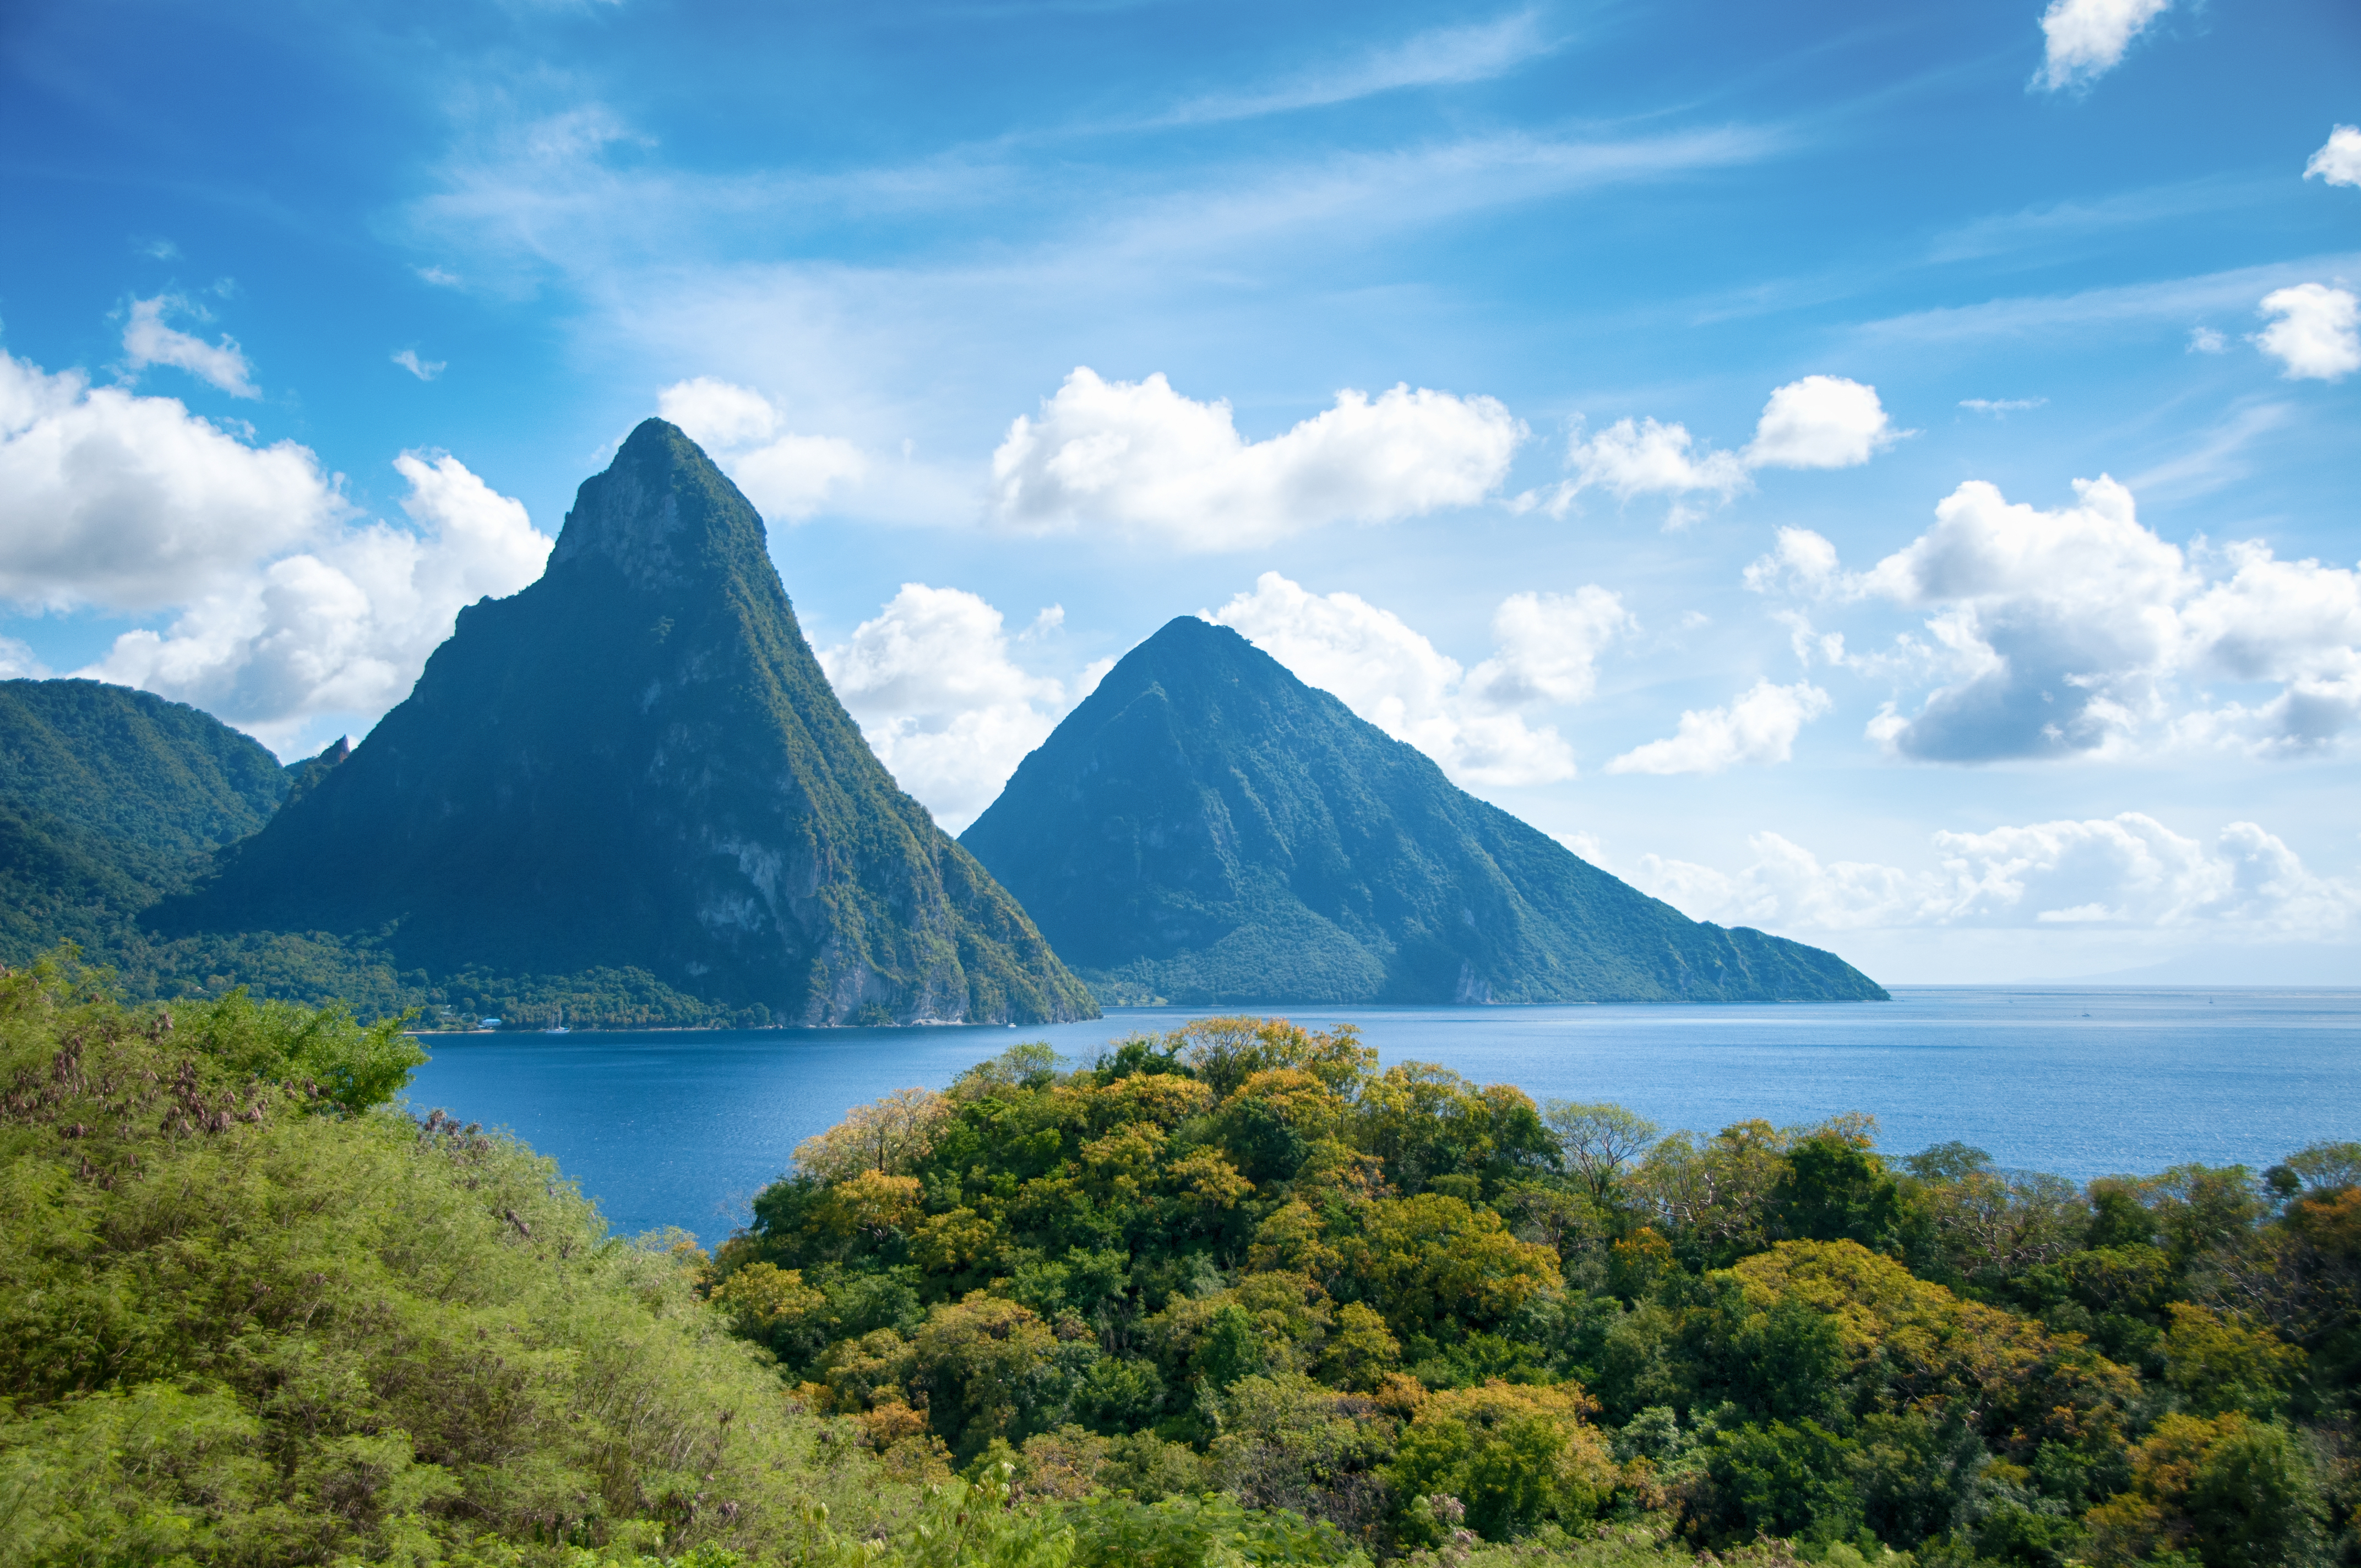 An adventurers guide to St Lucia - Thomas Cook Airlines Blog